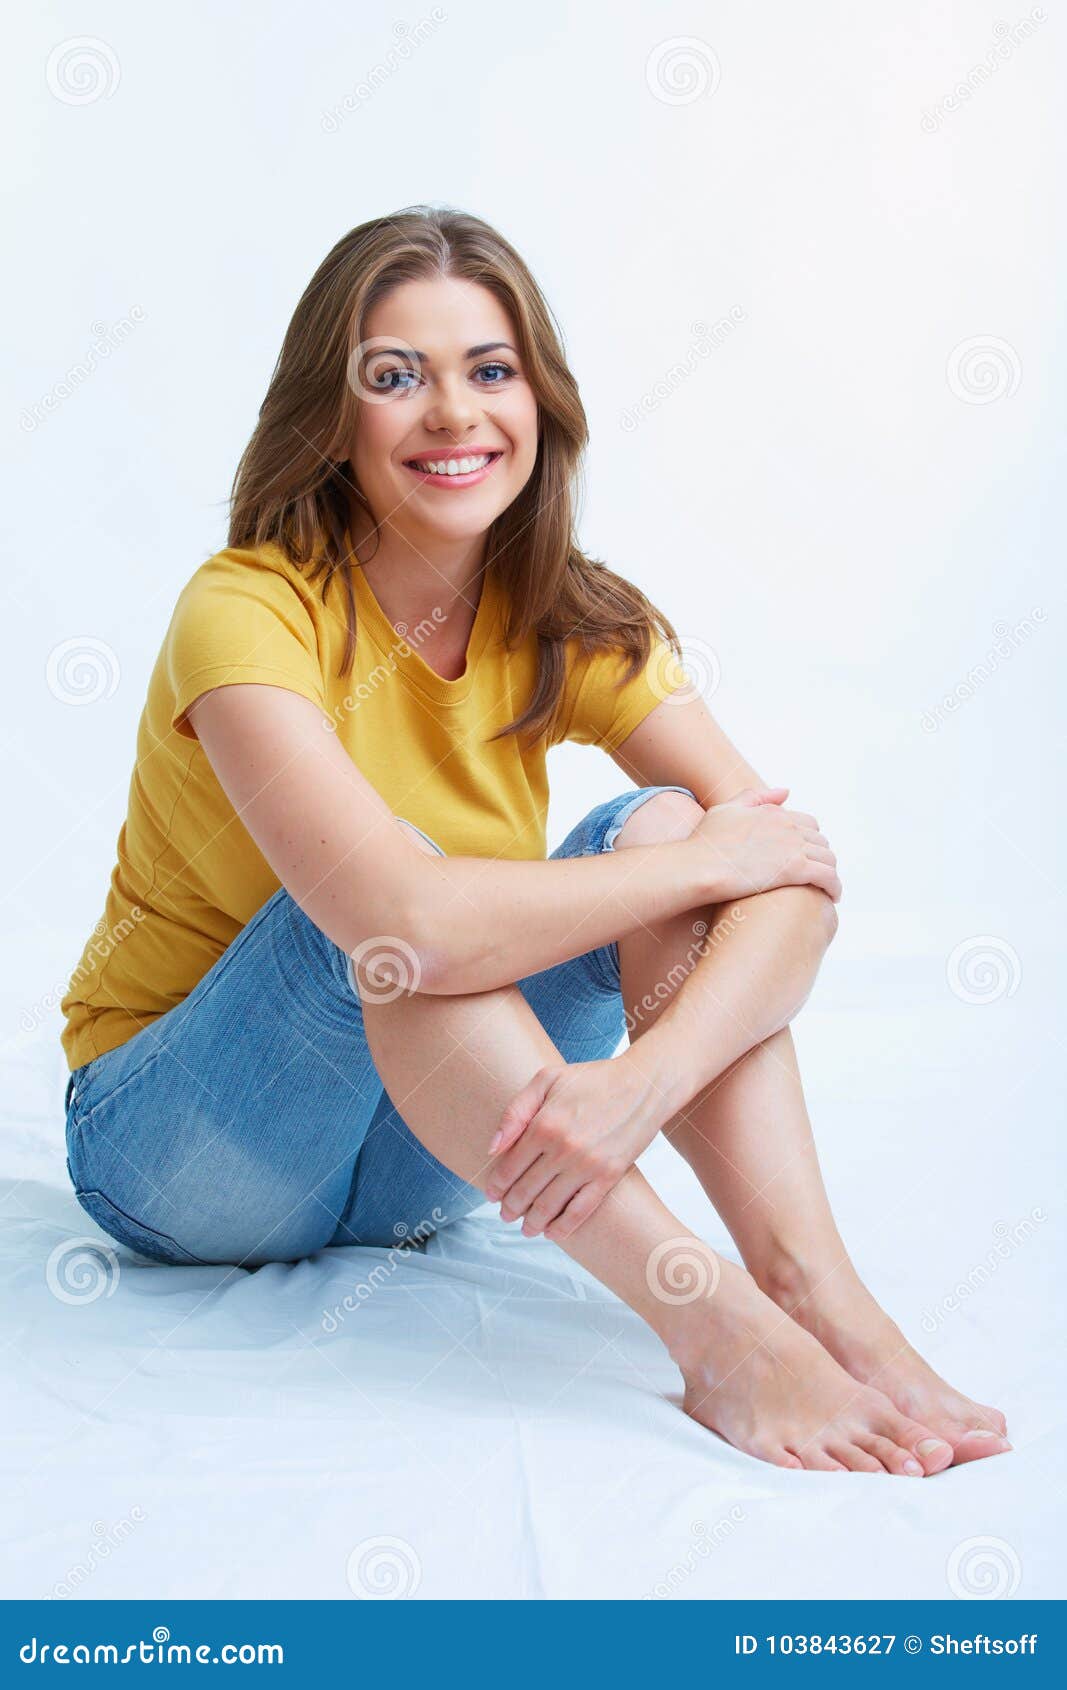 Woman sitting on a floor. stock image. Image of casual - 103843627